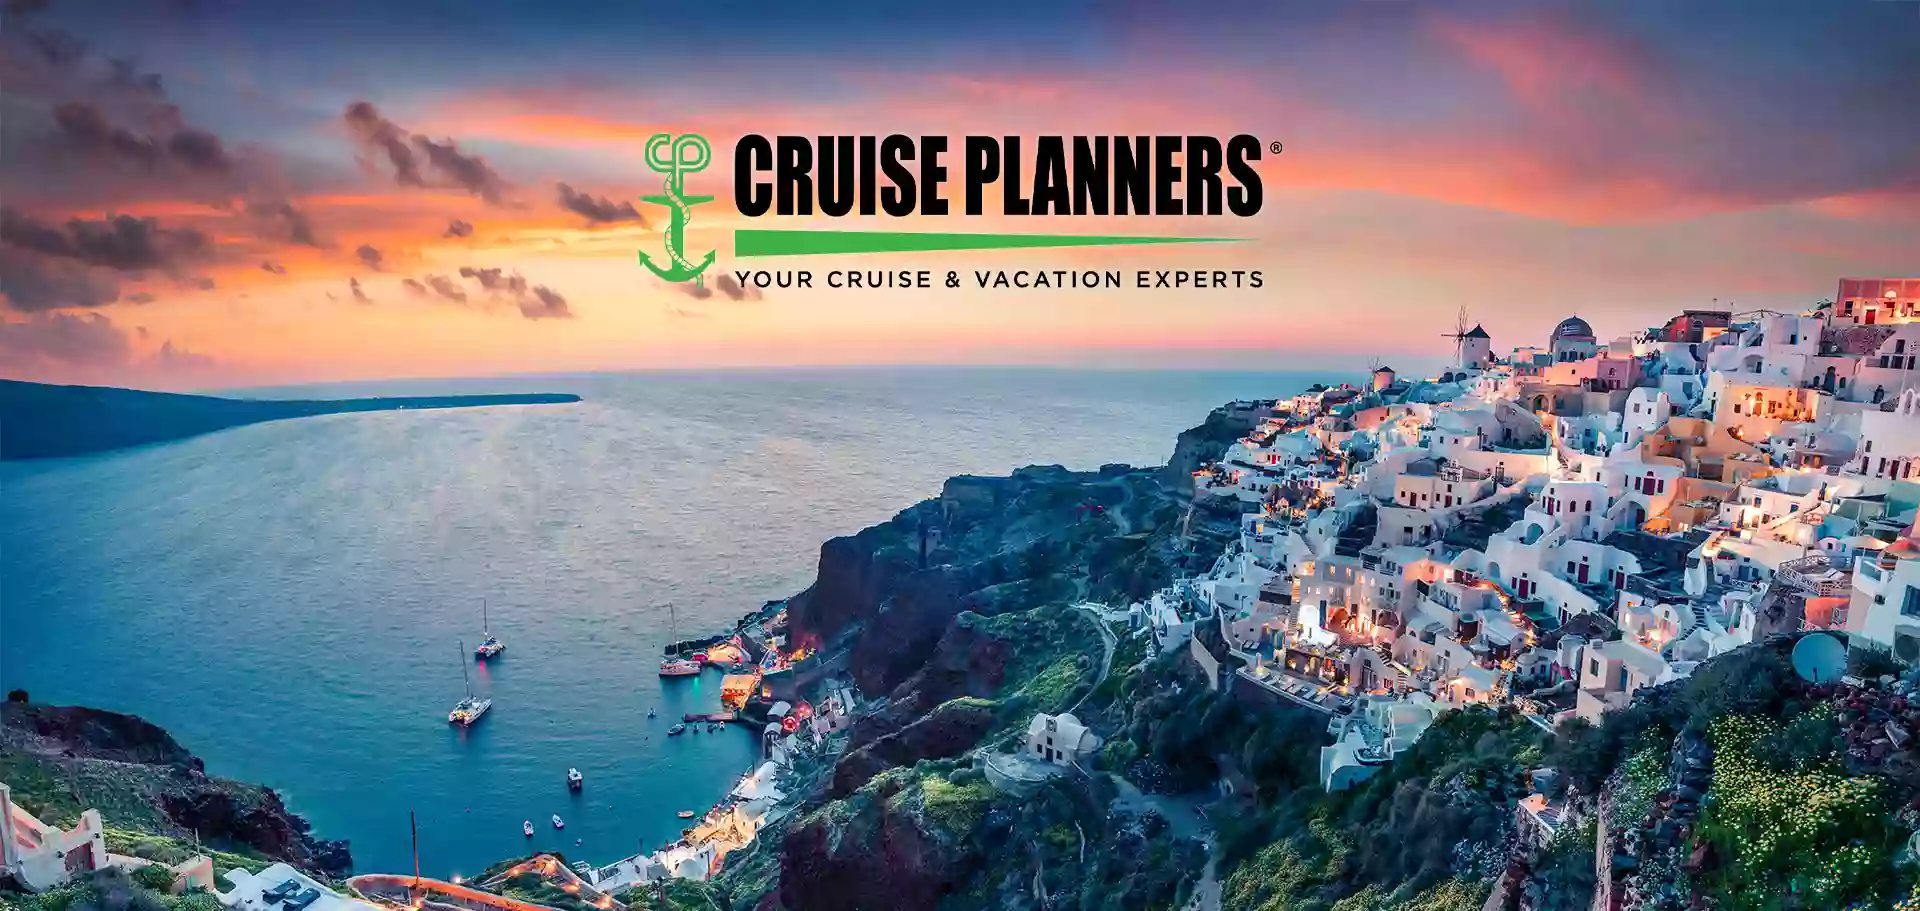 Cruise Planners - Mike Carter